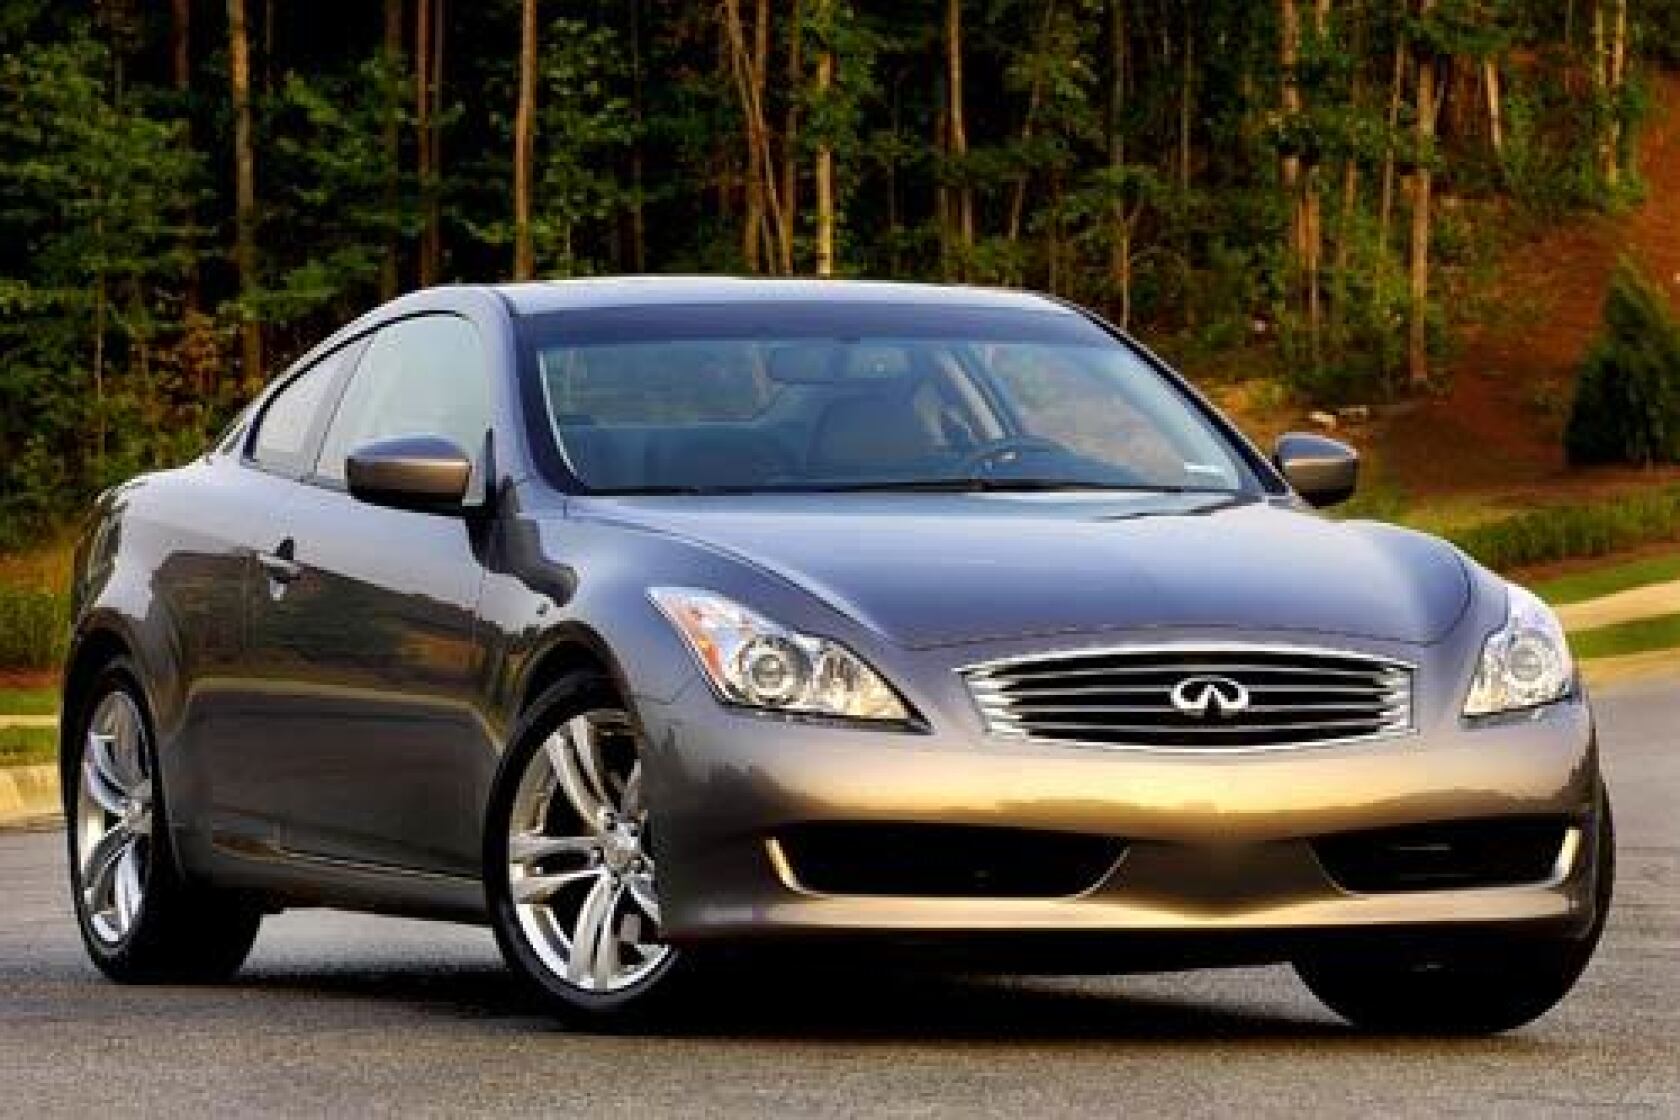 The 2008 Infiniti G37 Los Angeles Times